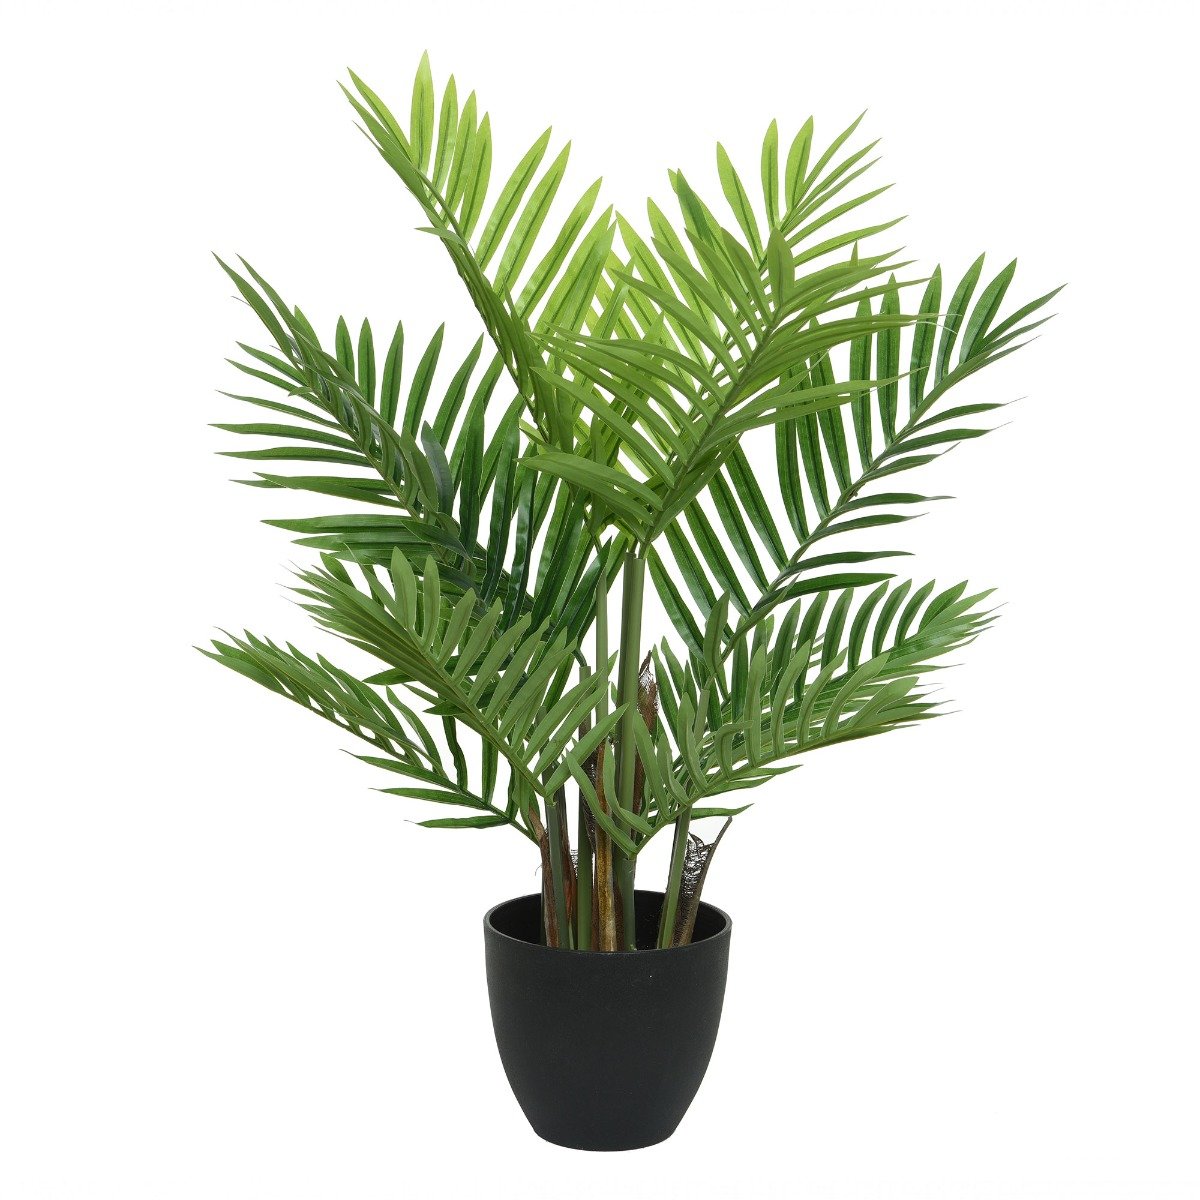 Potted Faux Palm Tree, Green Plastic | Barker & Stonehouse